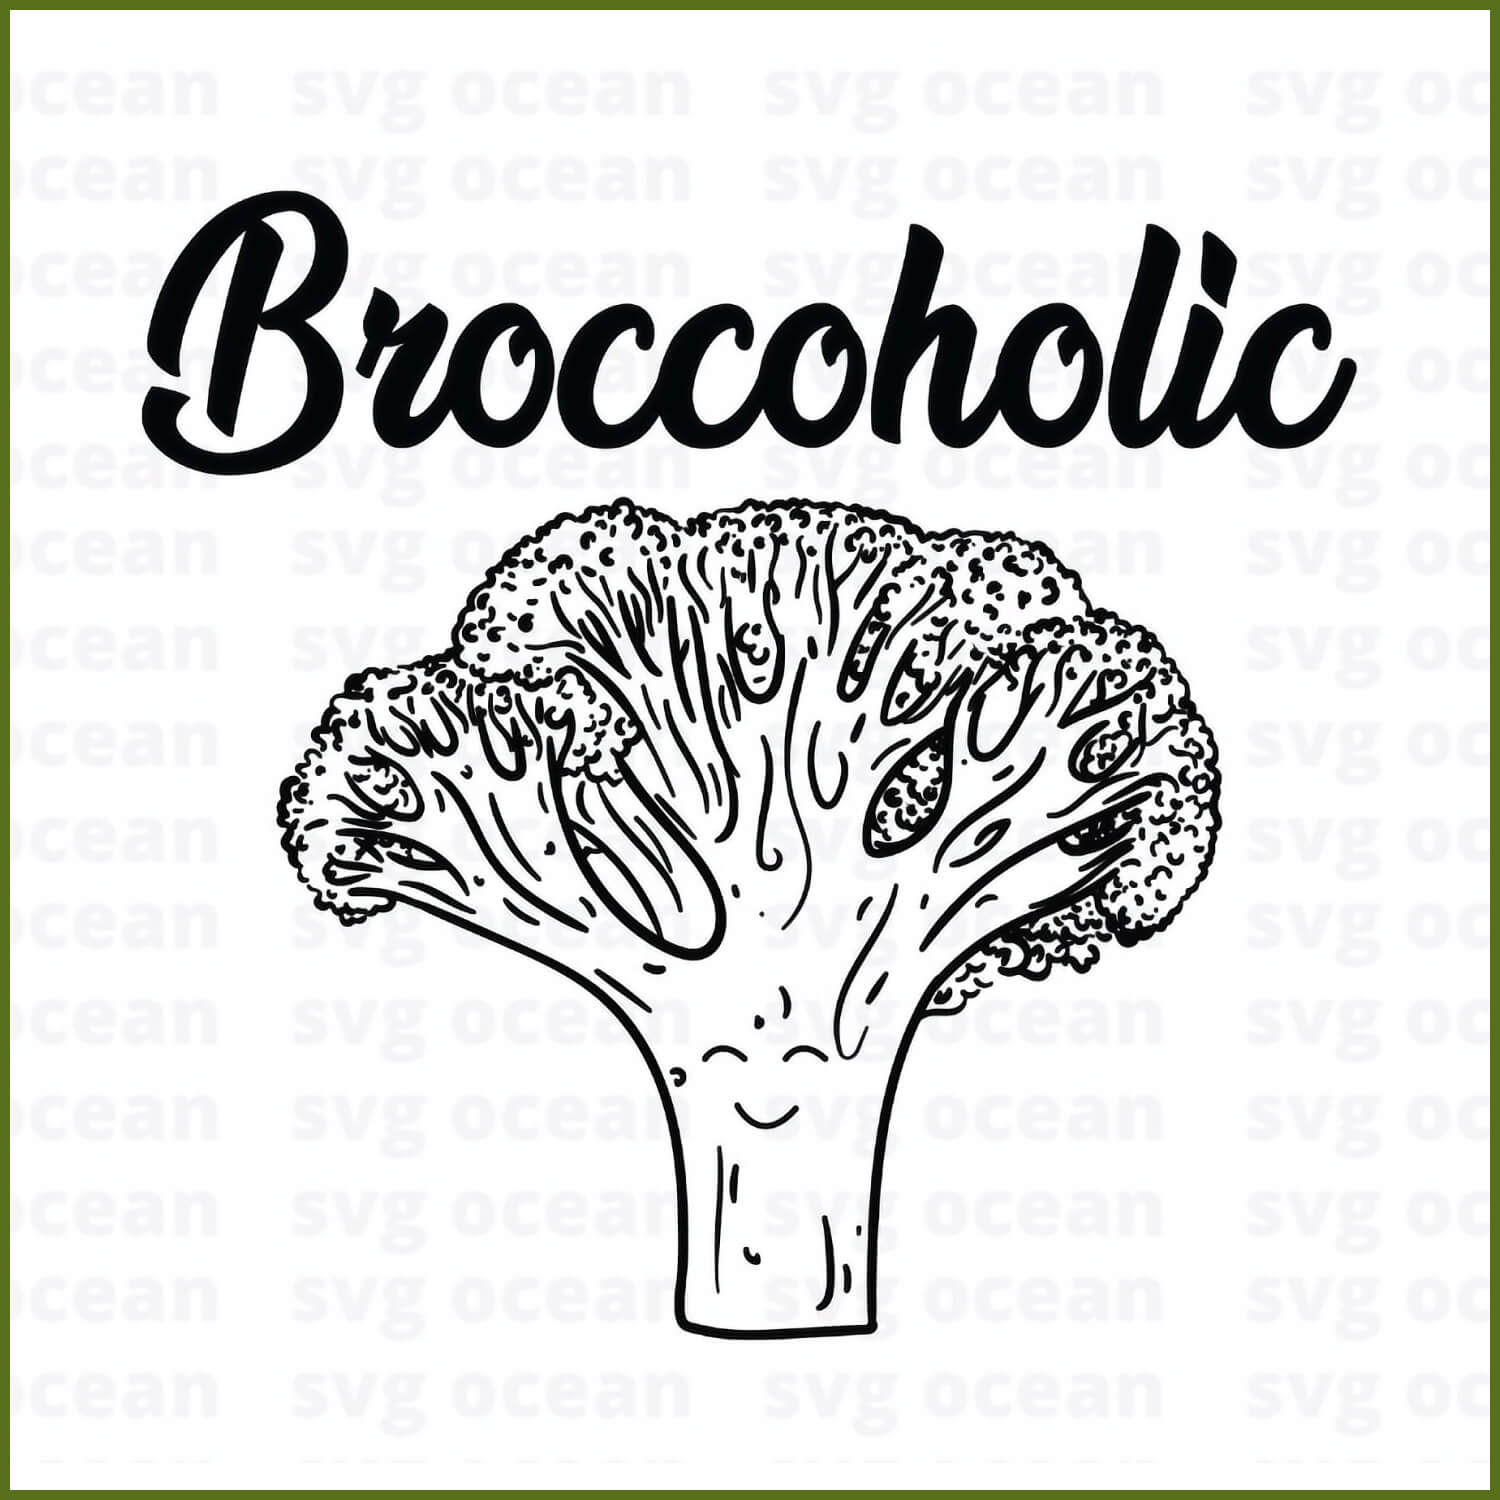 BROCCOHOLIC FUNNY SVG QUOTE.